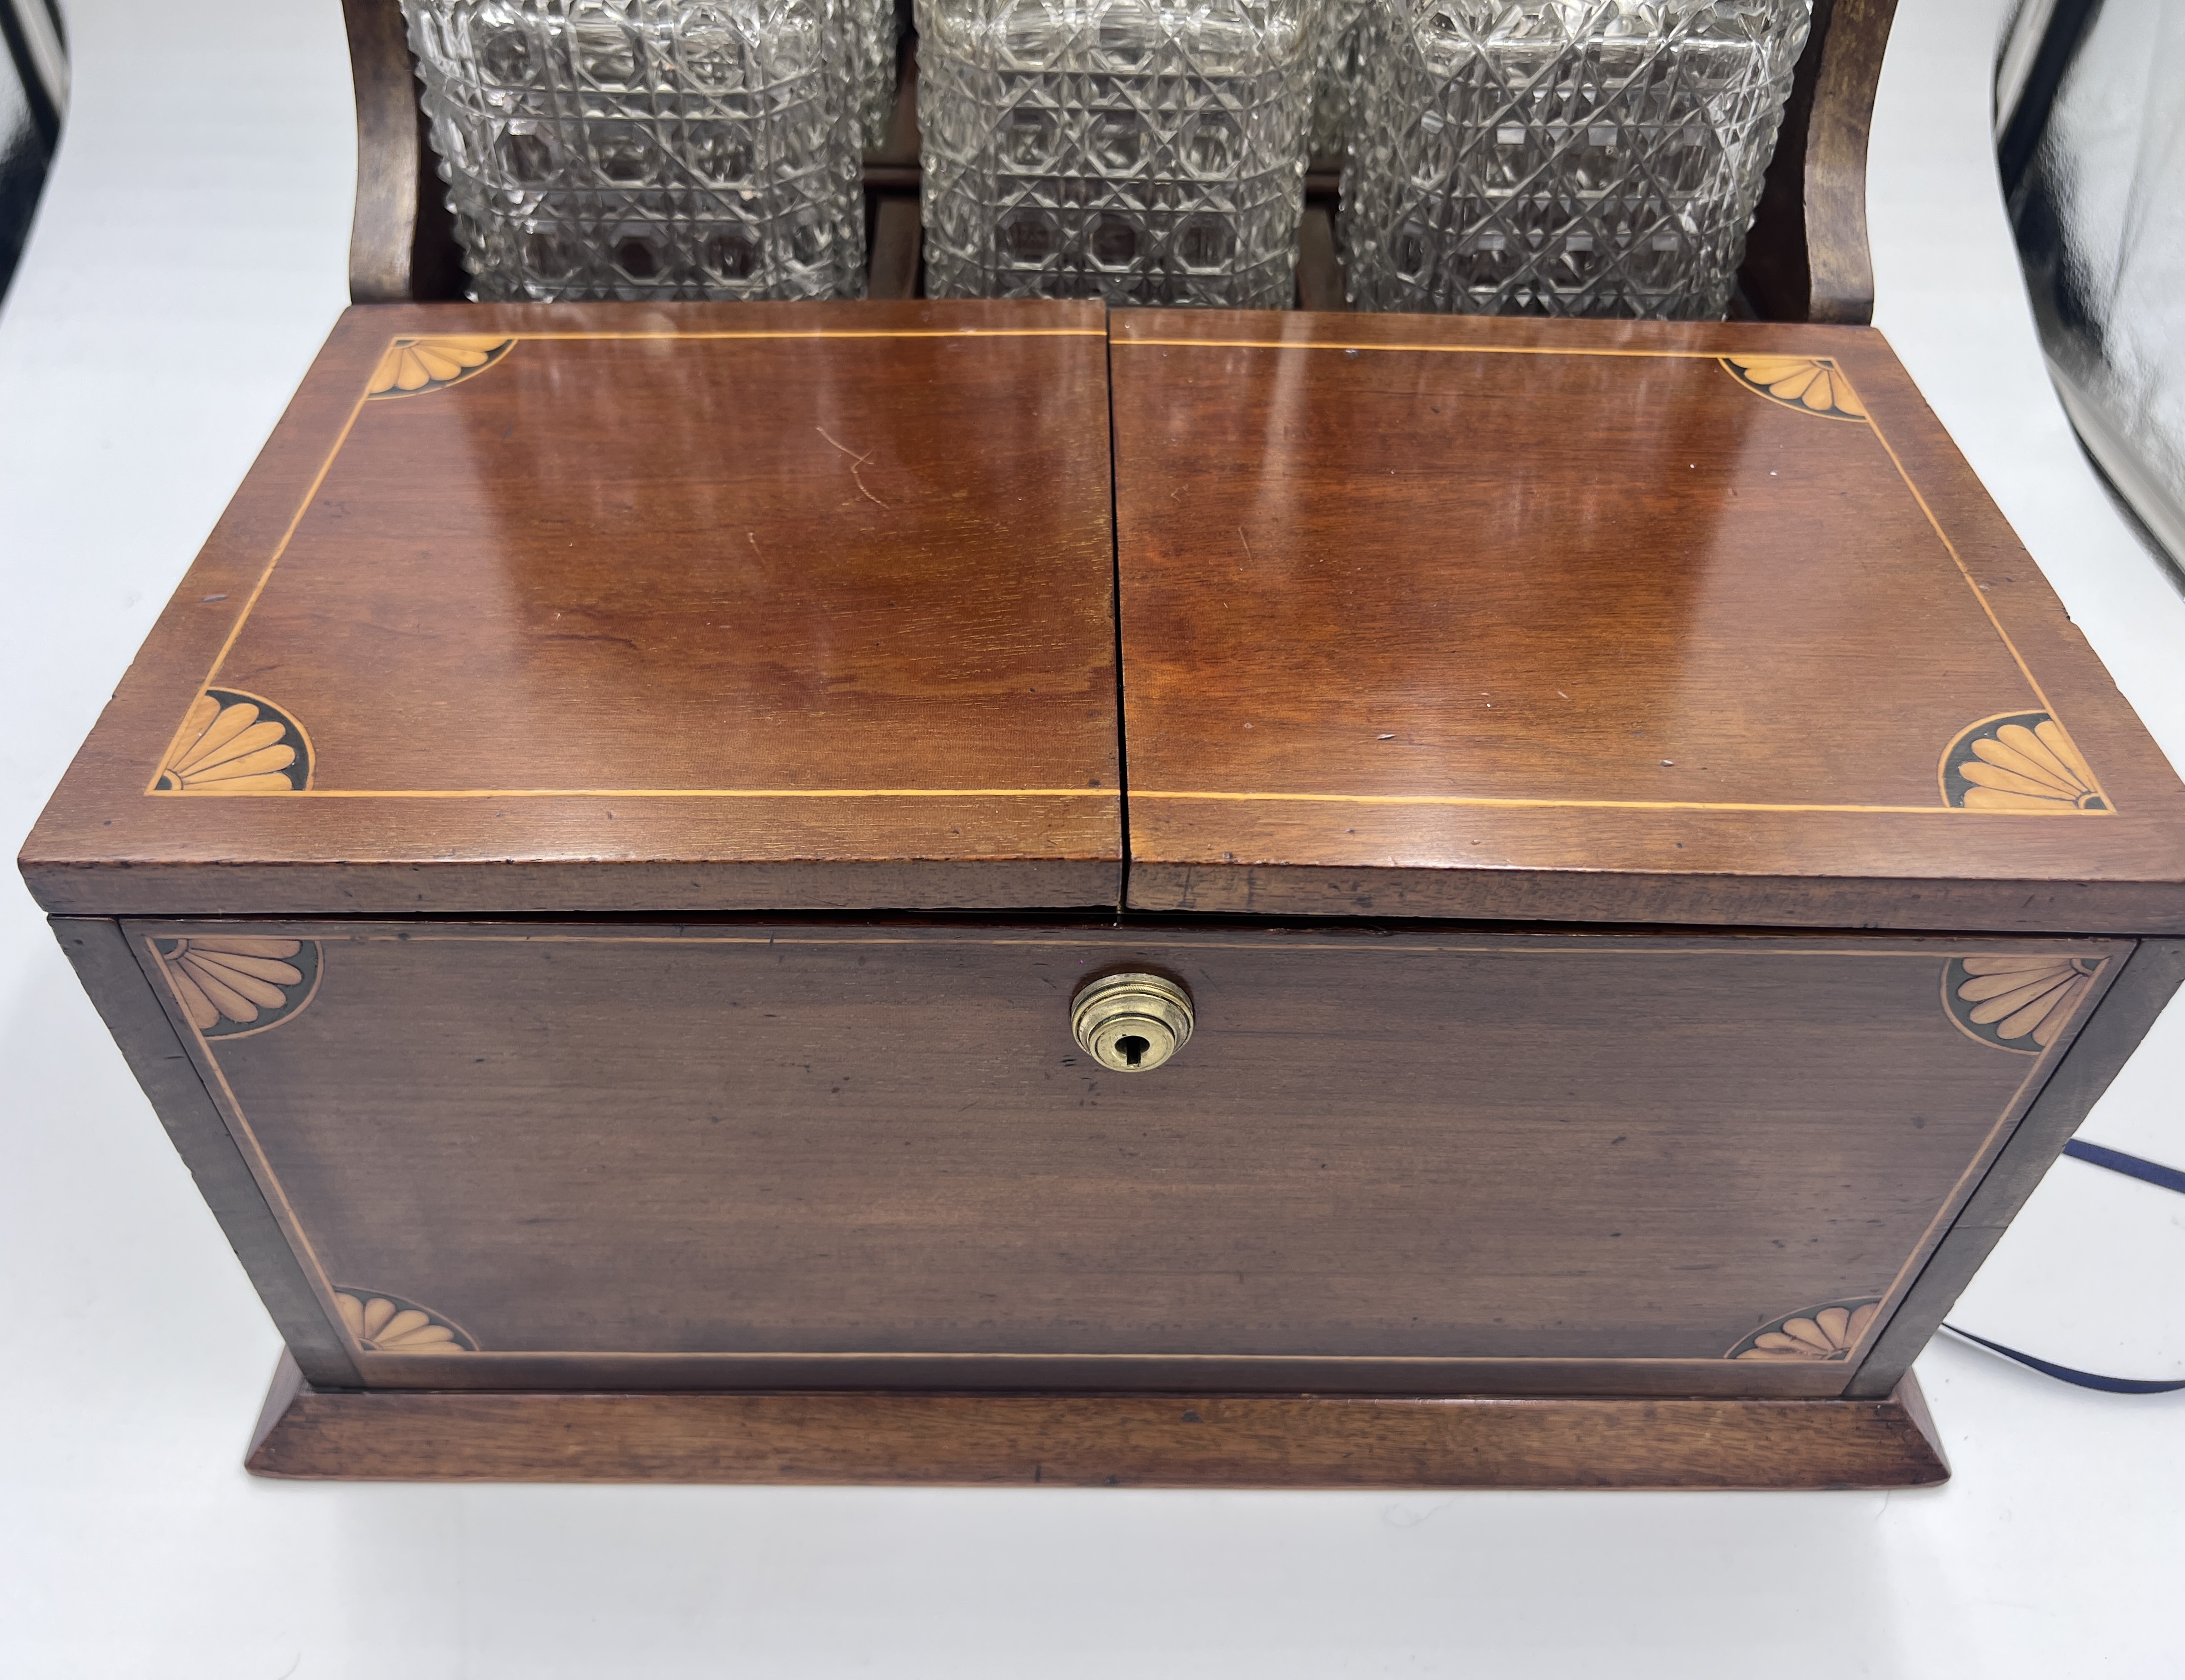 An Edwardian mahogany inlaid cut glass tantalus and games box containing cigar cutter, silver plated - Image 10 of 14